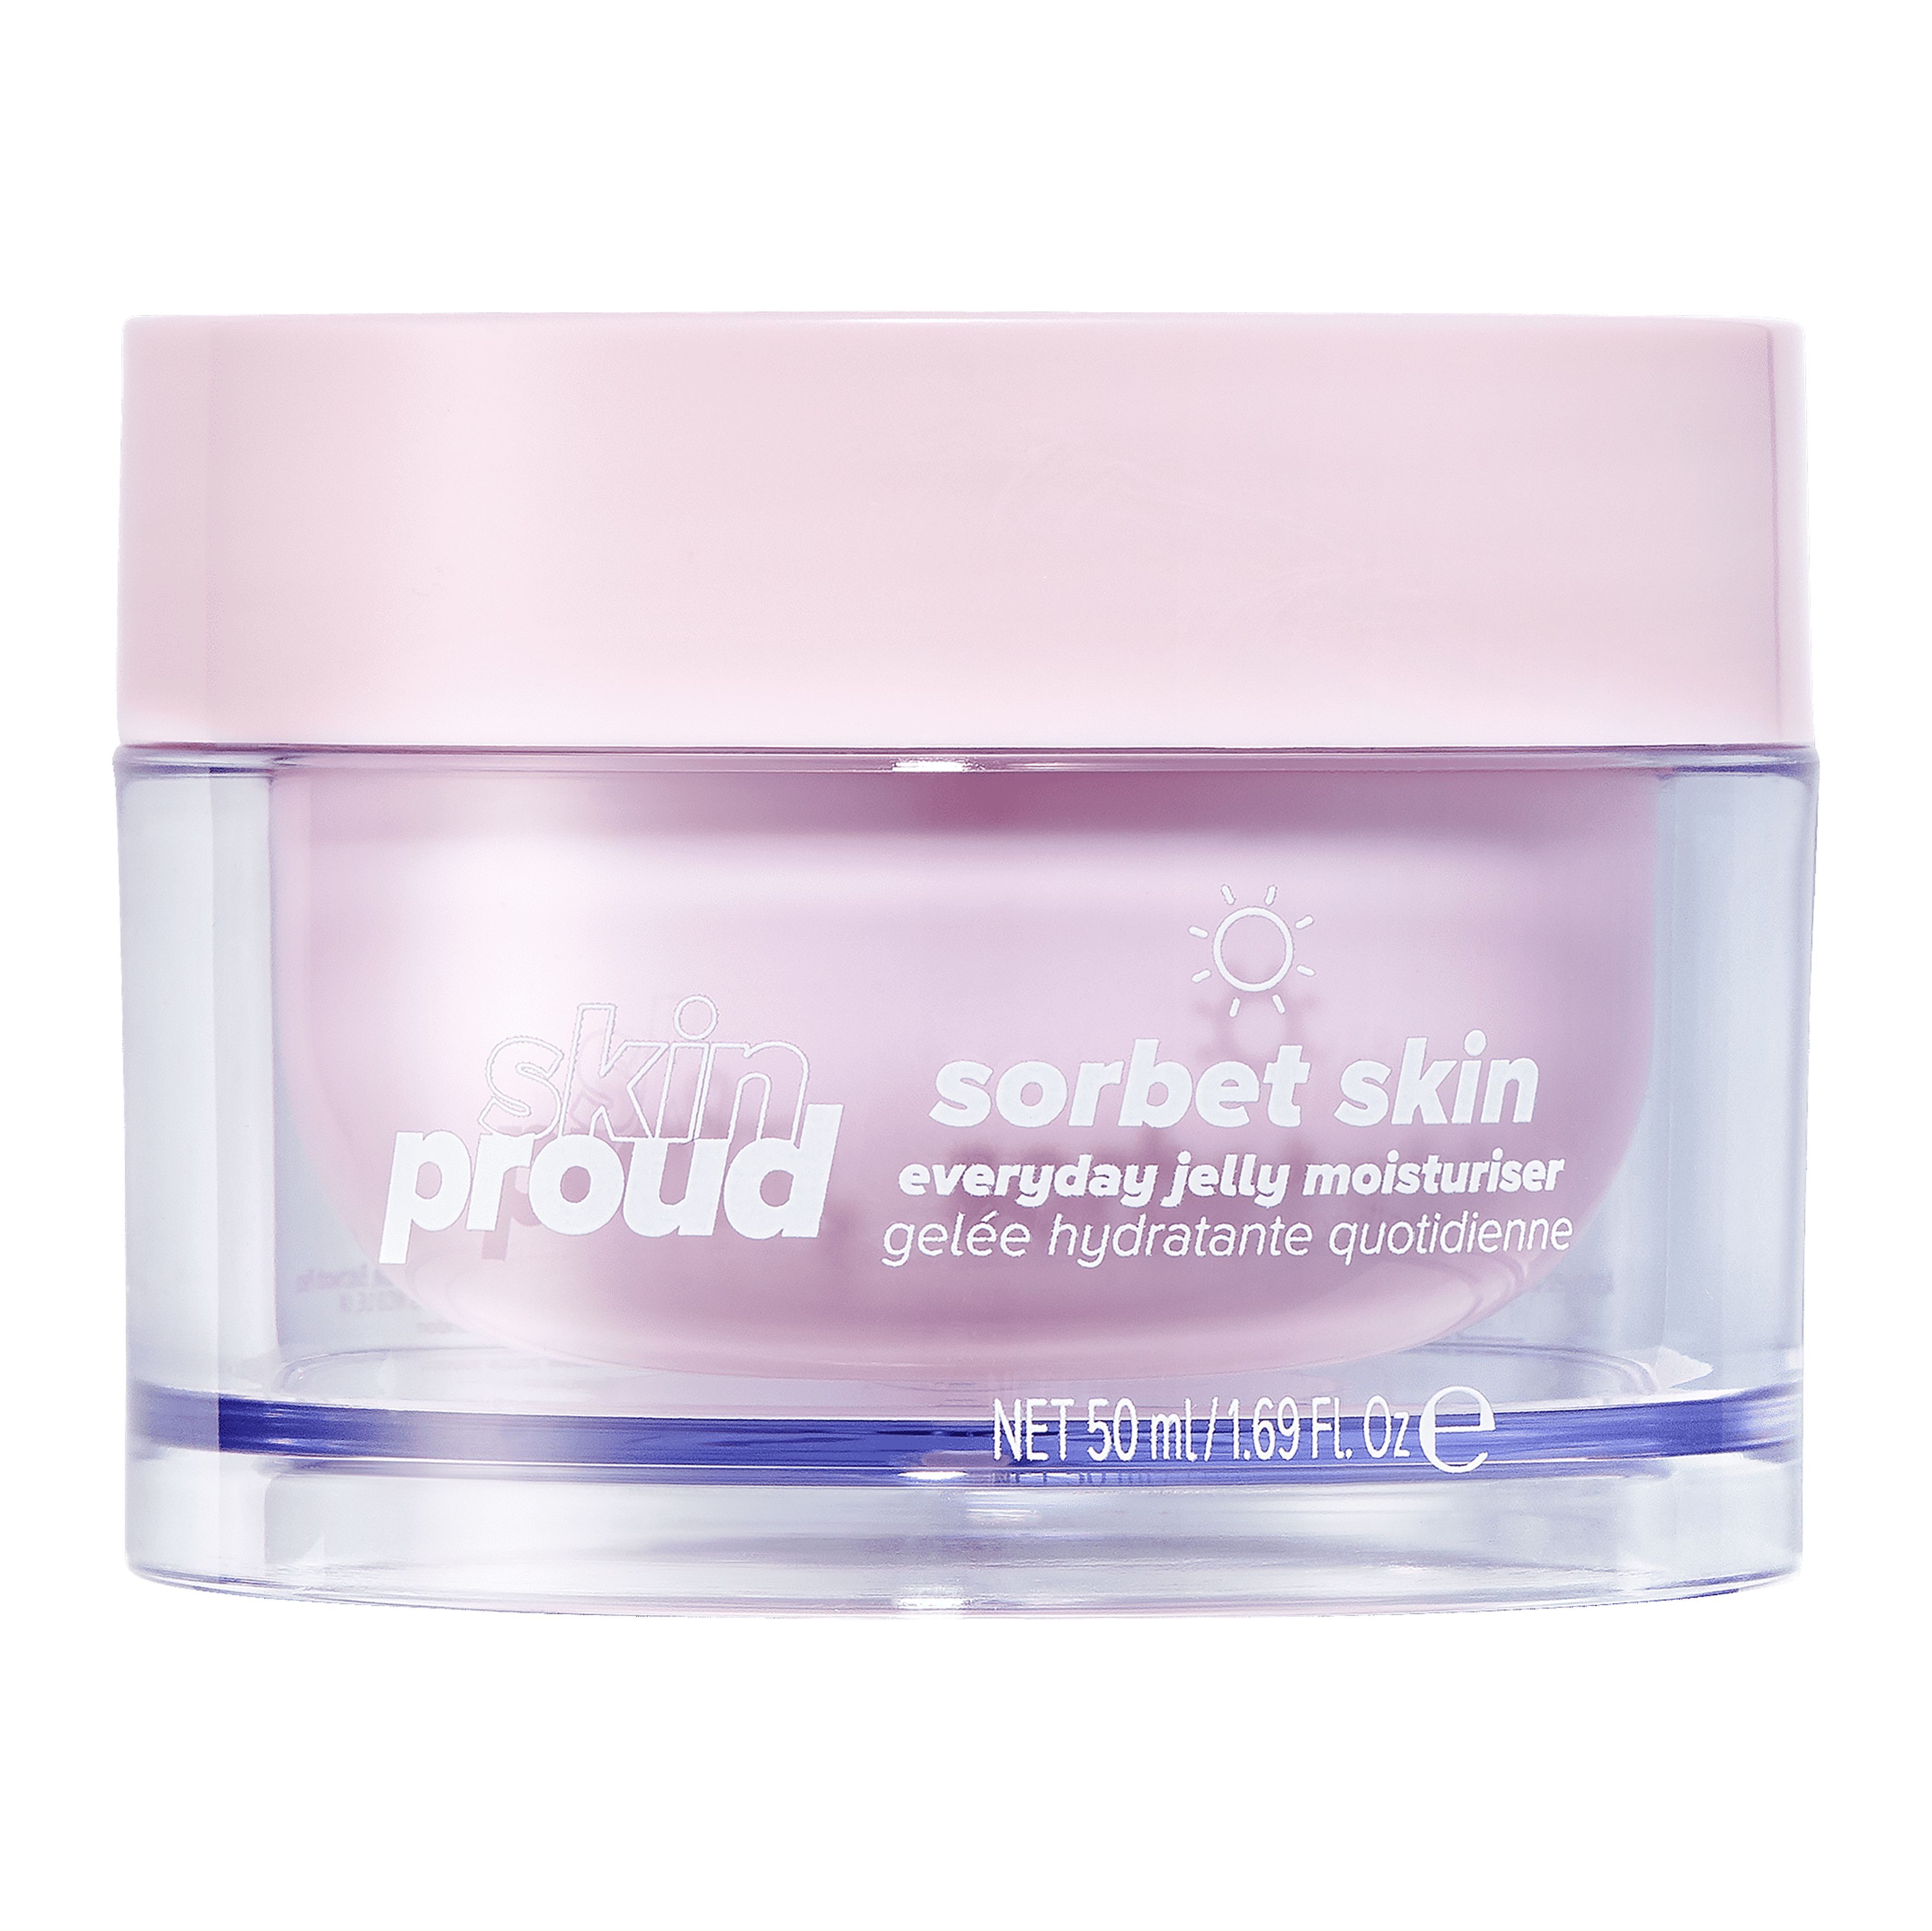 Skin Proud Sorbet Skin, Everyday Jelly Face Moisturizer with Hyaluronic Acid Complex, Oil-Free, 100% Vegan, 1.69 fl oz - image 1 of 12